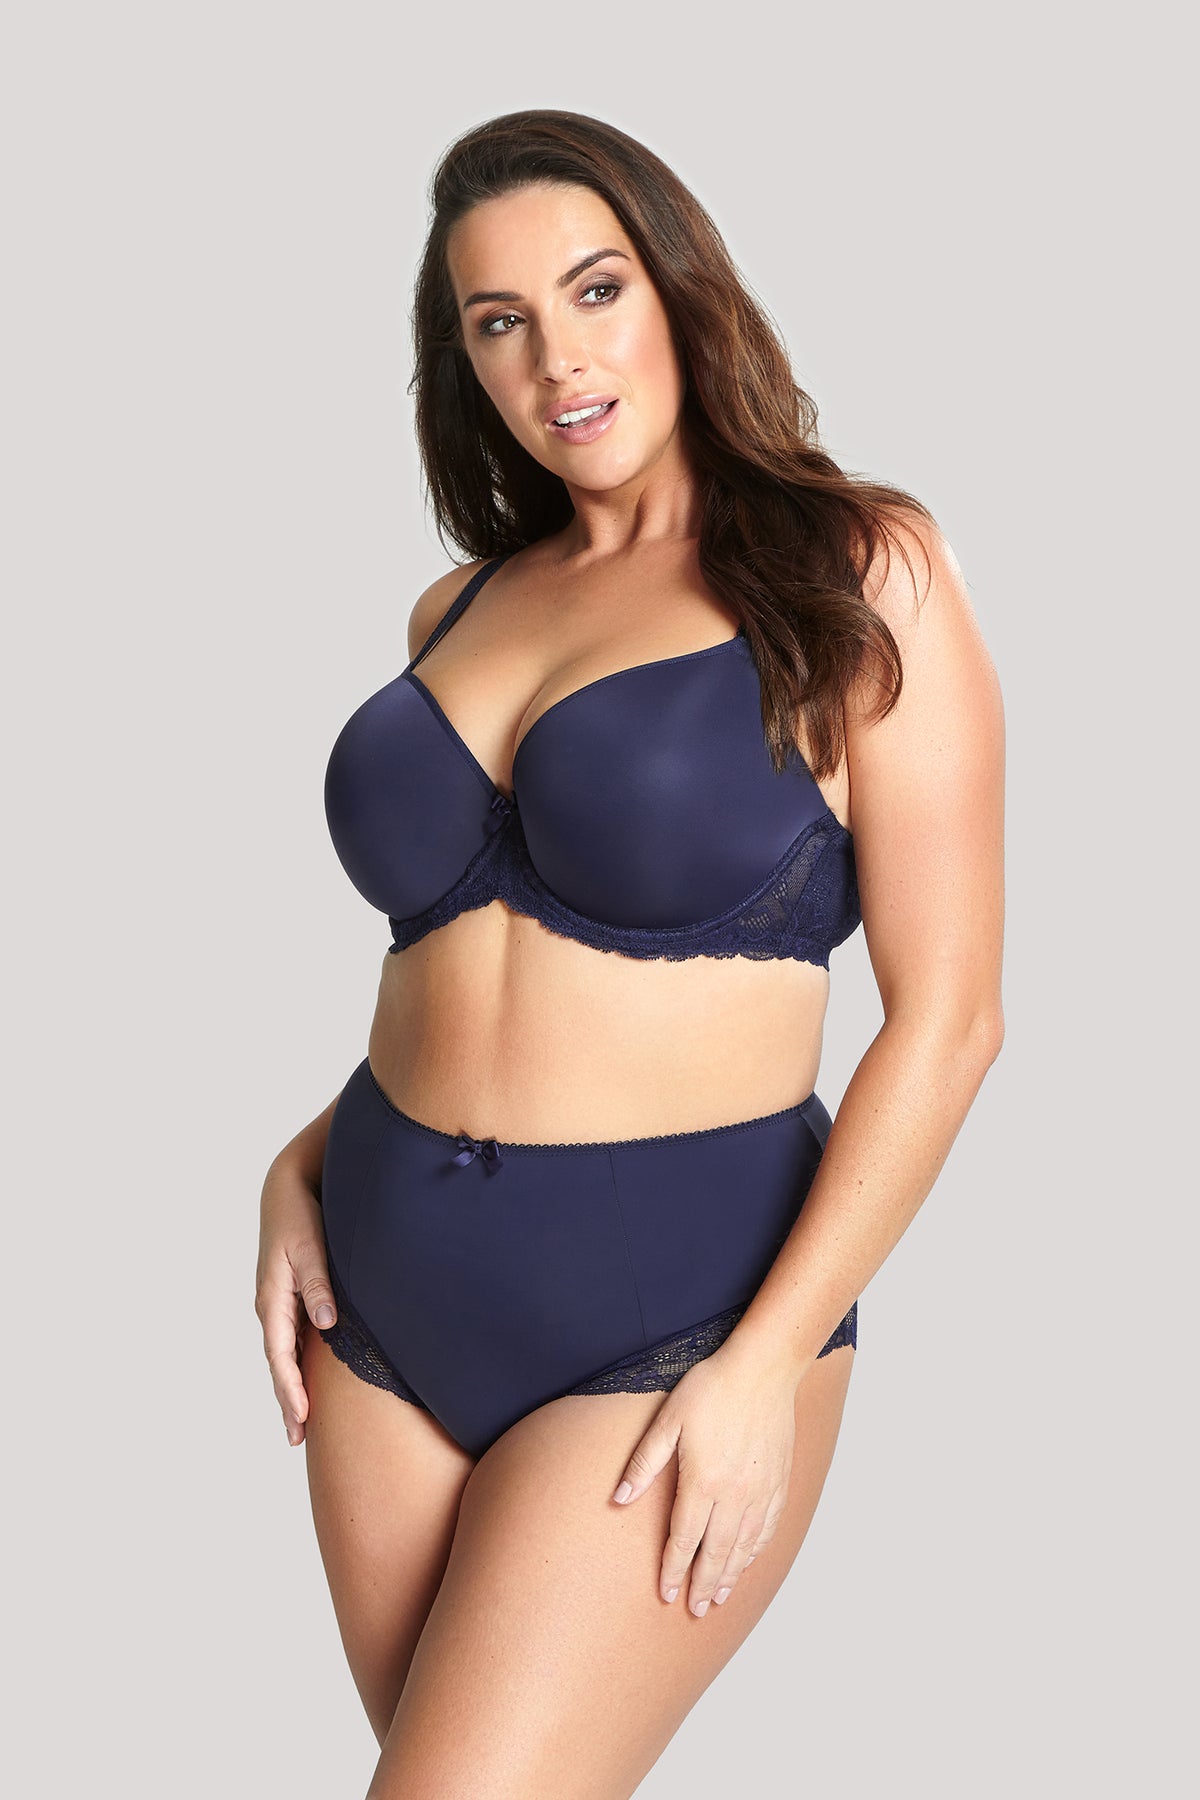 Panache Sculptresse Sasha Plunge Moulded Padded Wired Bra 9506 Ink Full Length